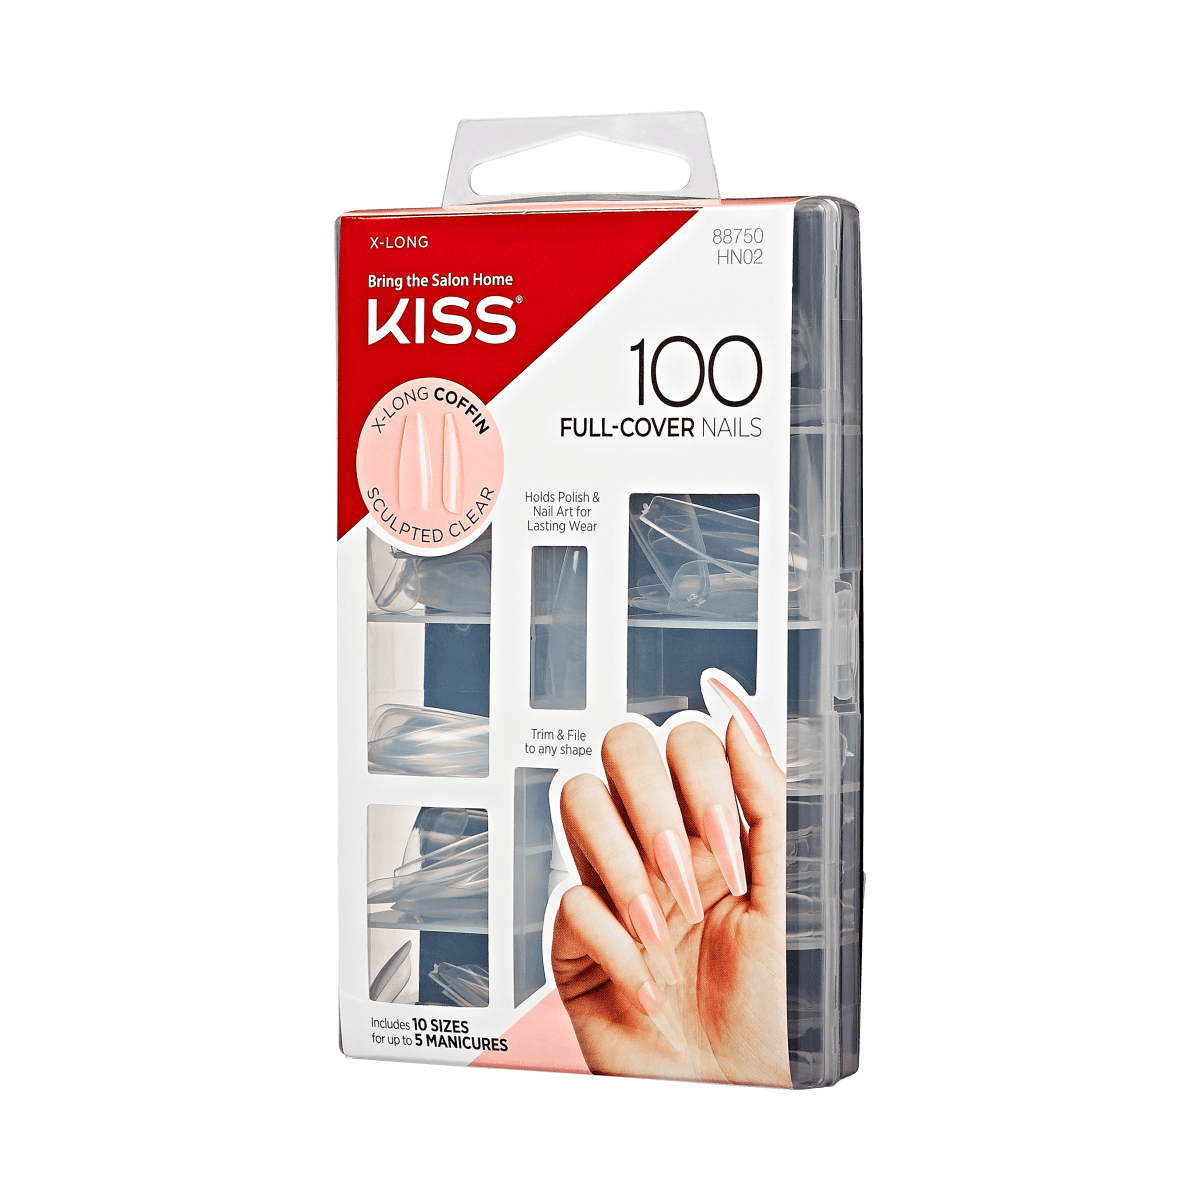 KISS 100 Full-Cover Nails Kit - XL Clear Coffin